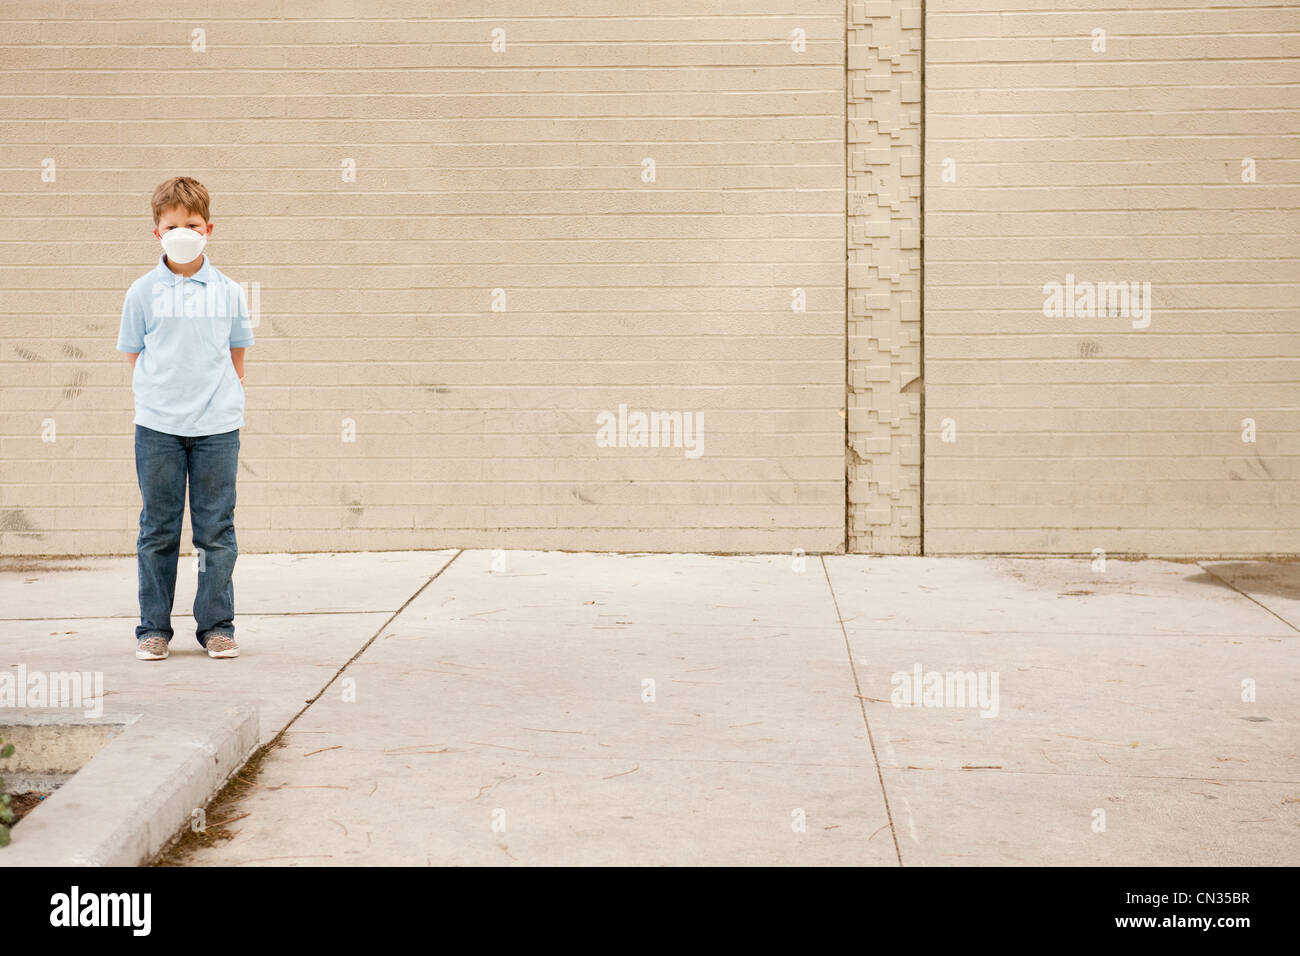 Young boy standing by brick wall wearing dust mask Stock Photo